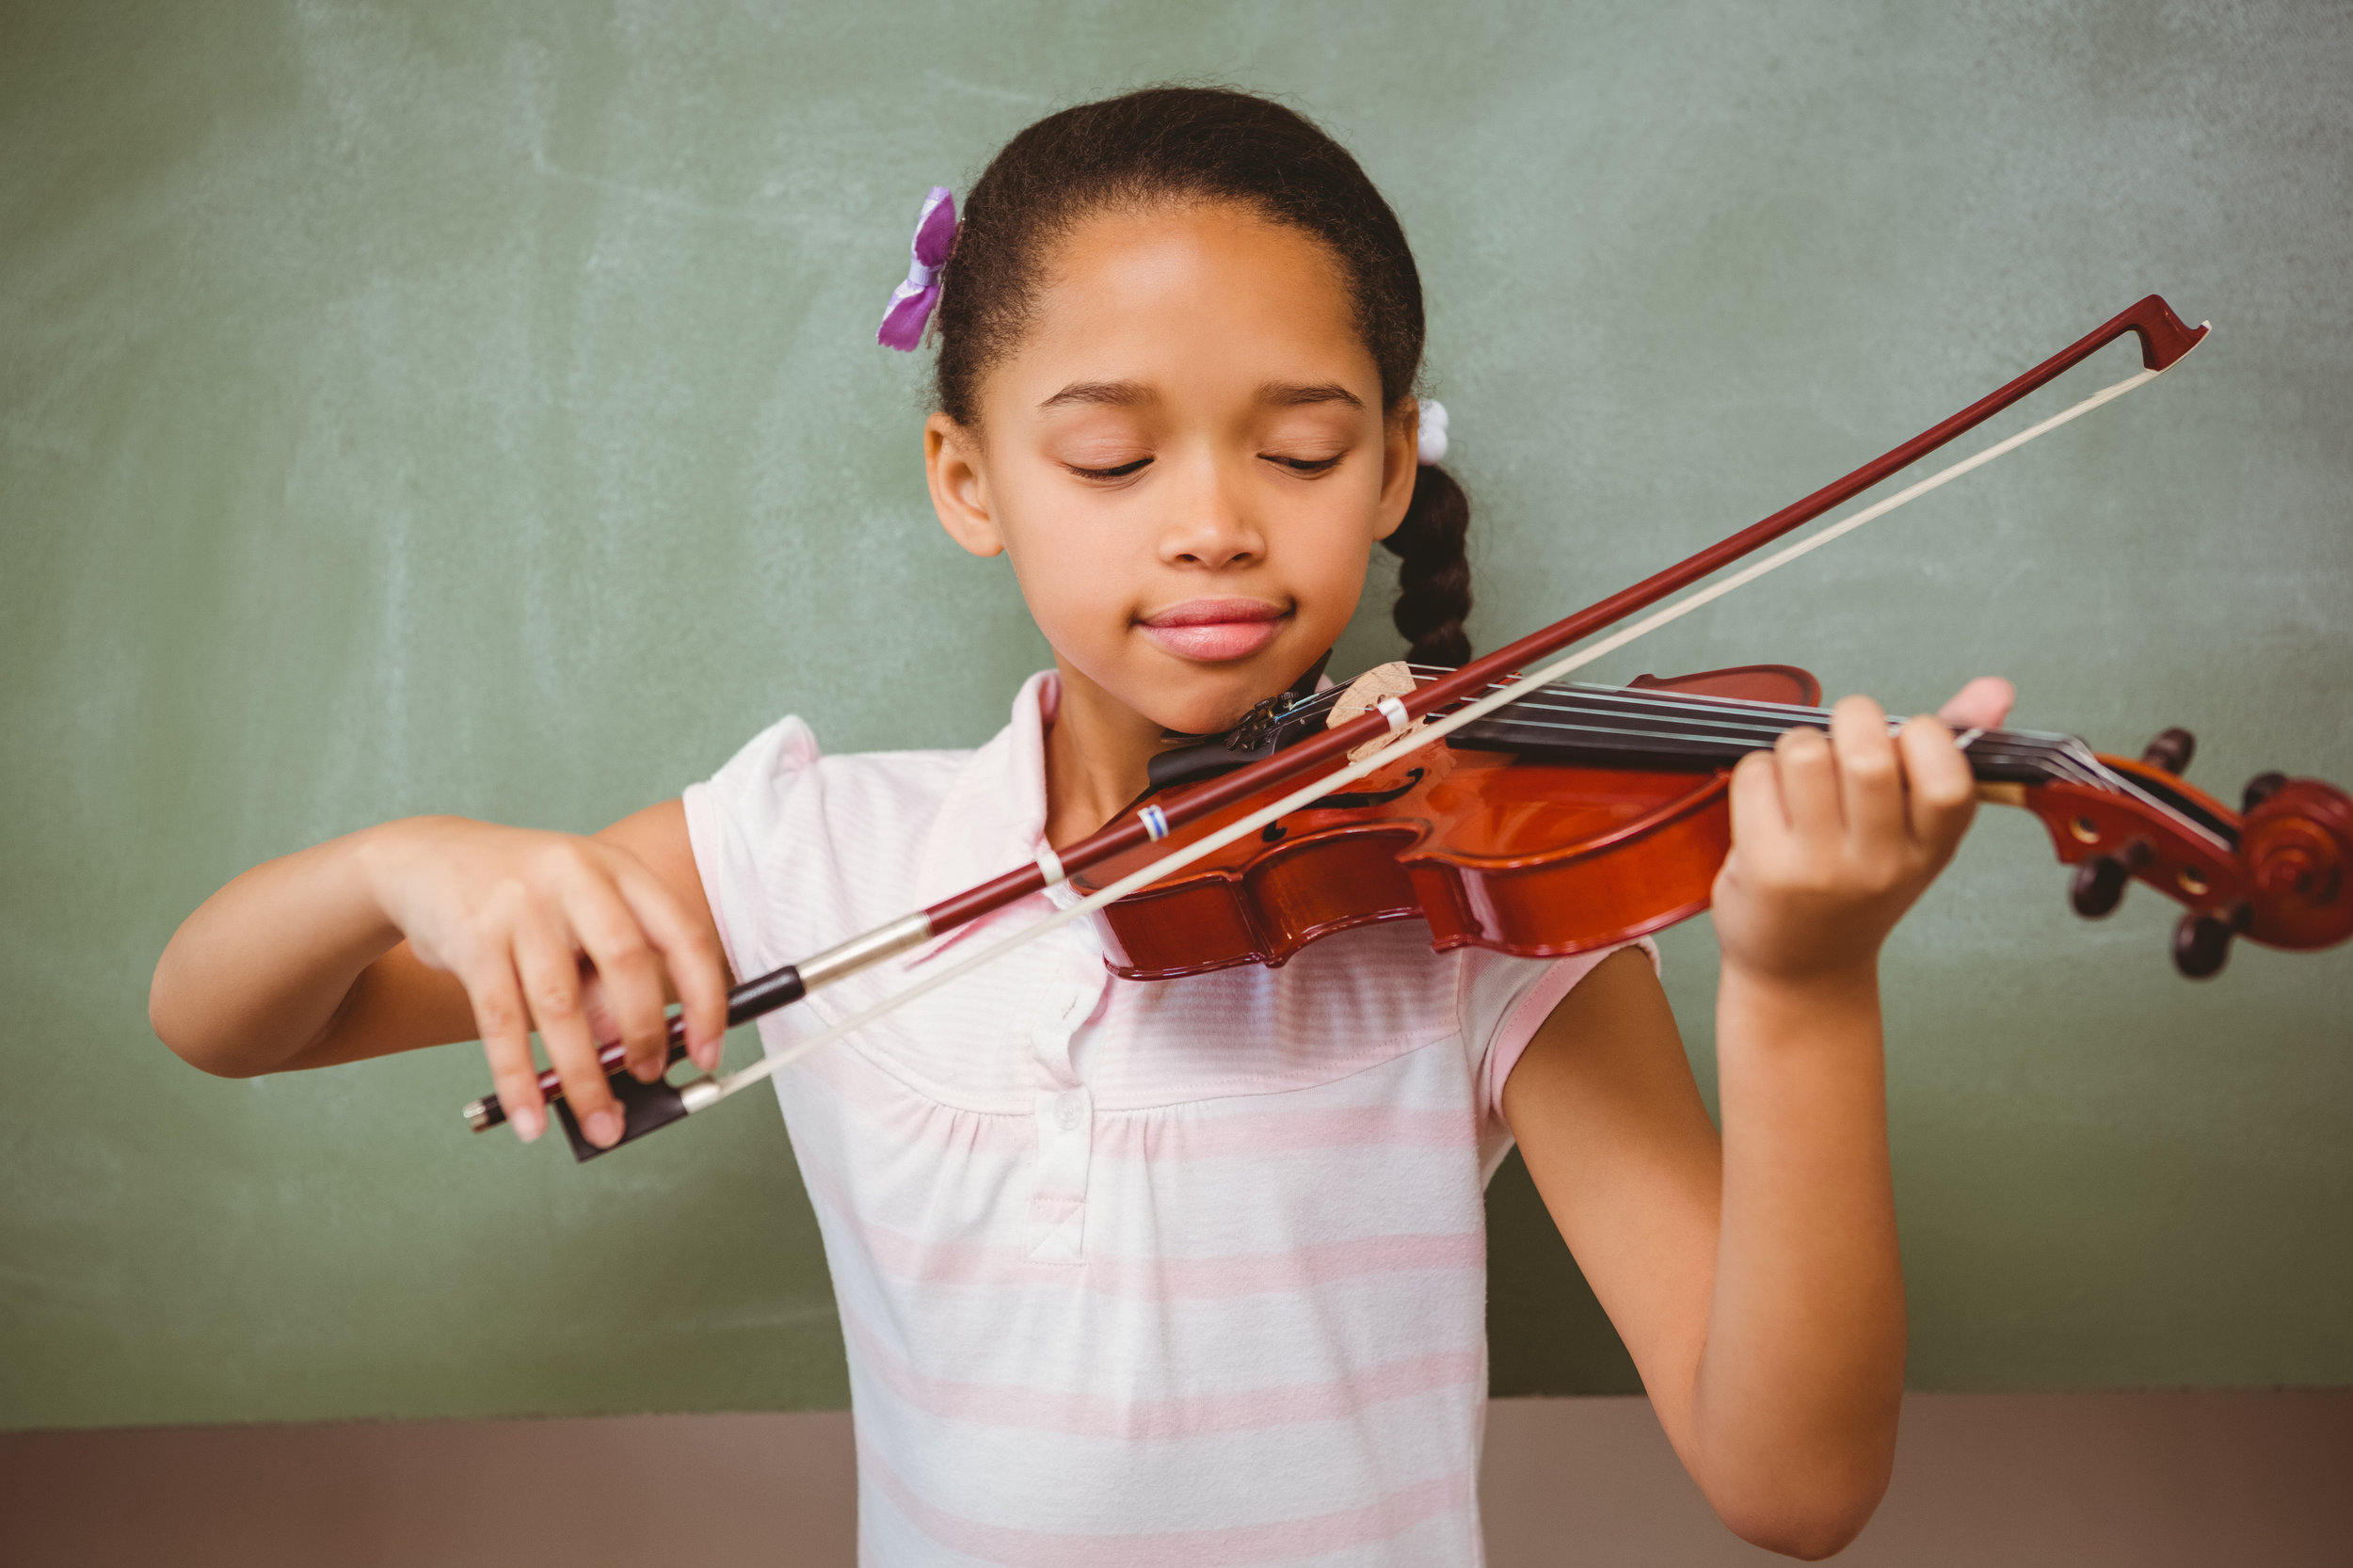 cms stock photo african american girl with violin.jpg